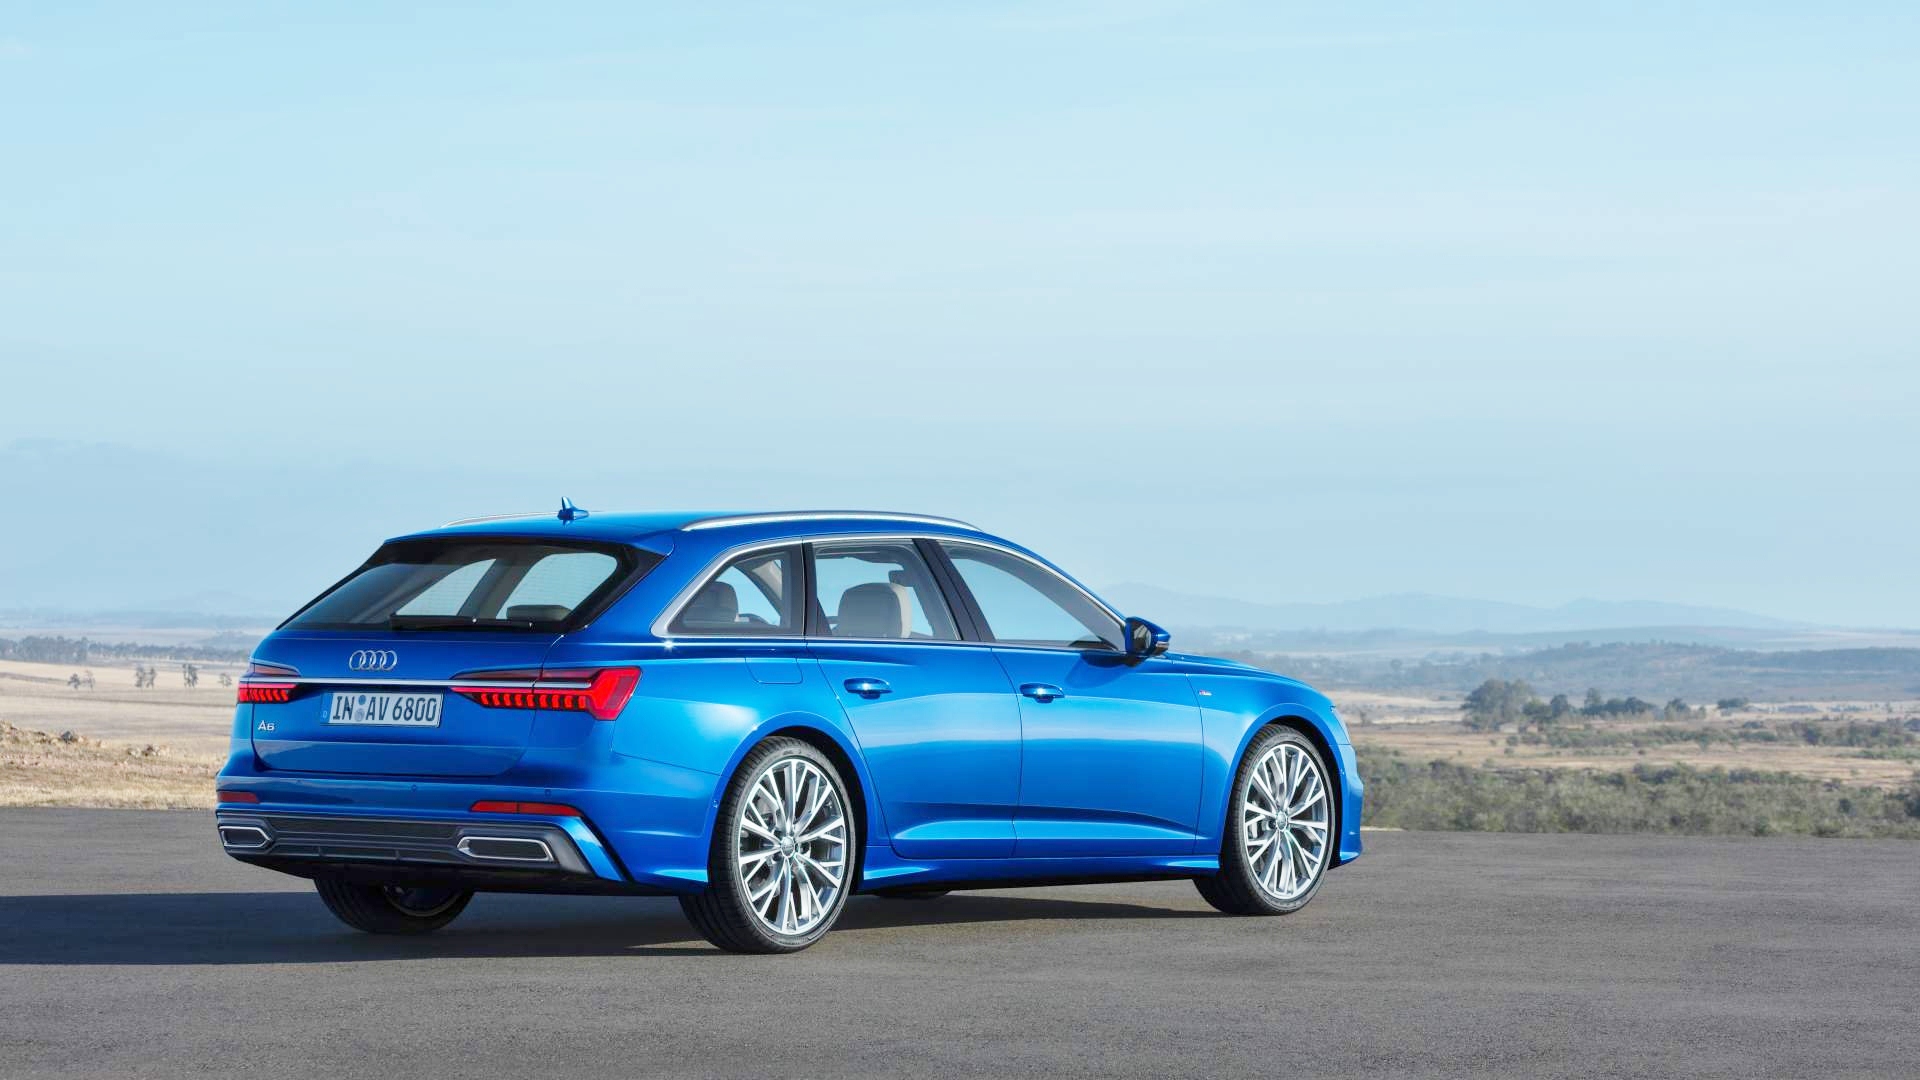 Audi-A6-Avant-2019-dep-hon-voi-gia-1-4-ty-dong-anh-3